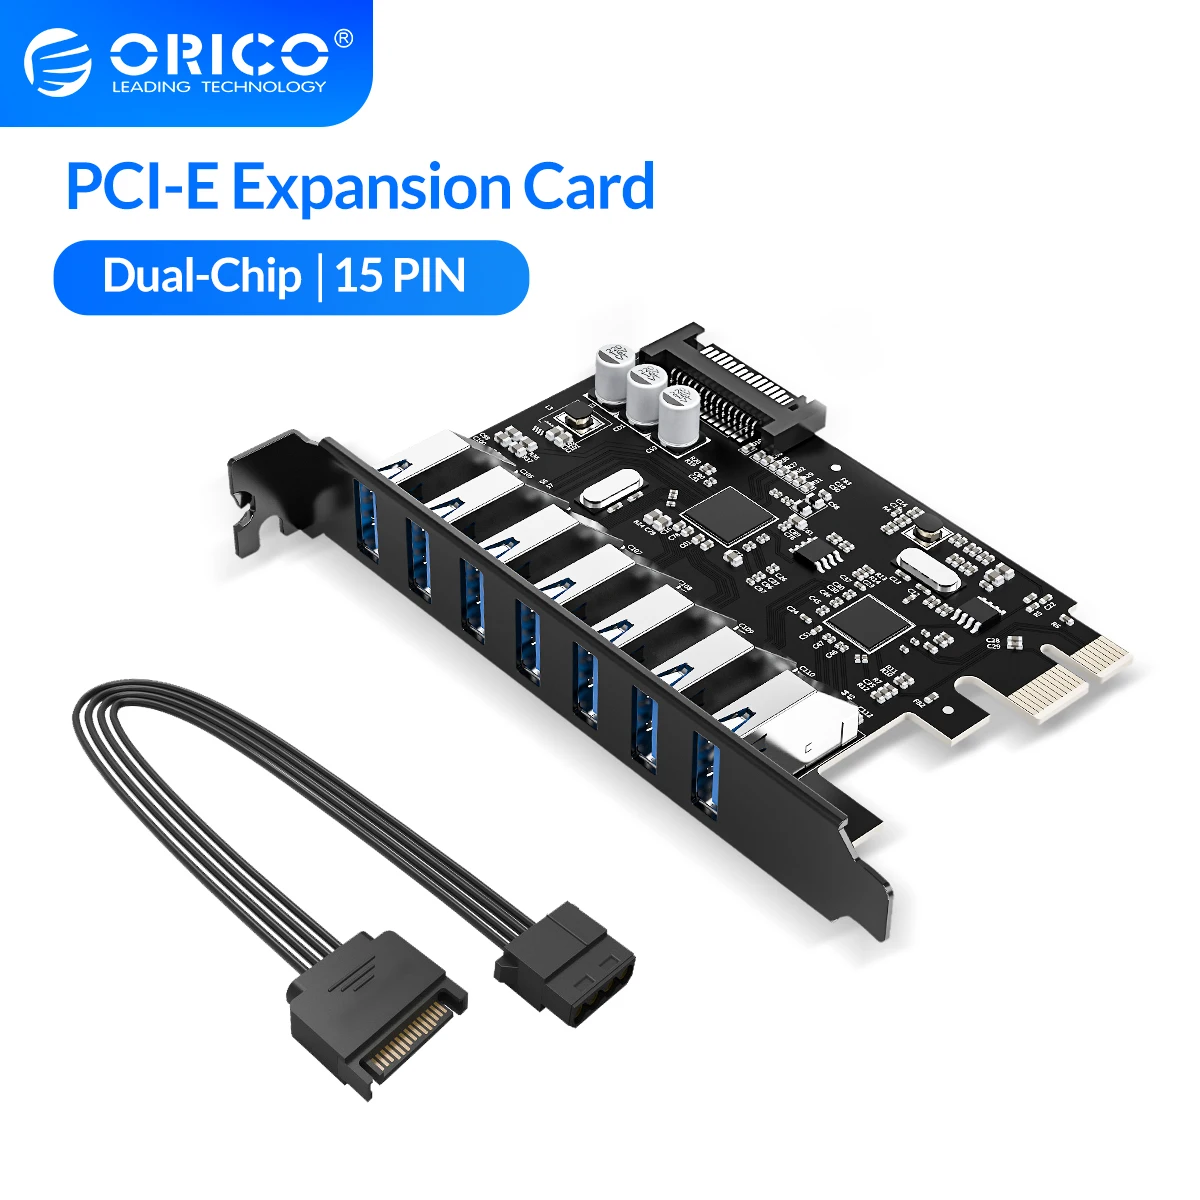 ORICO SuperSpeed 7 Port USB 3.0 PCI-E Express Card with a 15pin SATA Power Connector PCIE Adapt